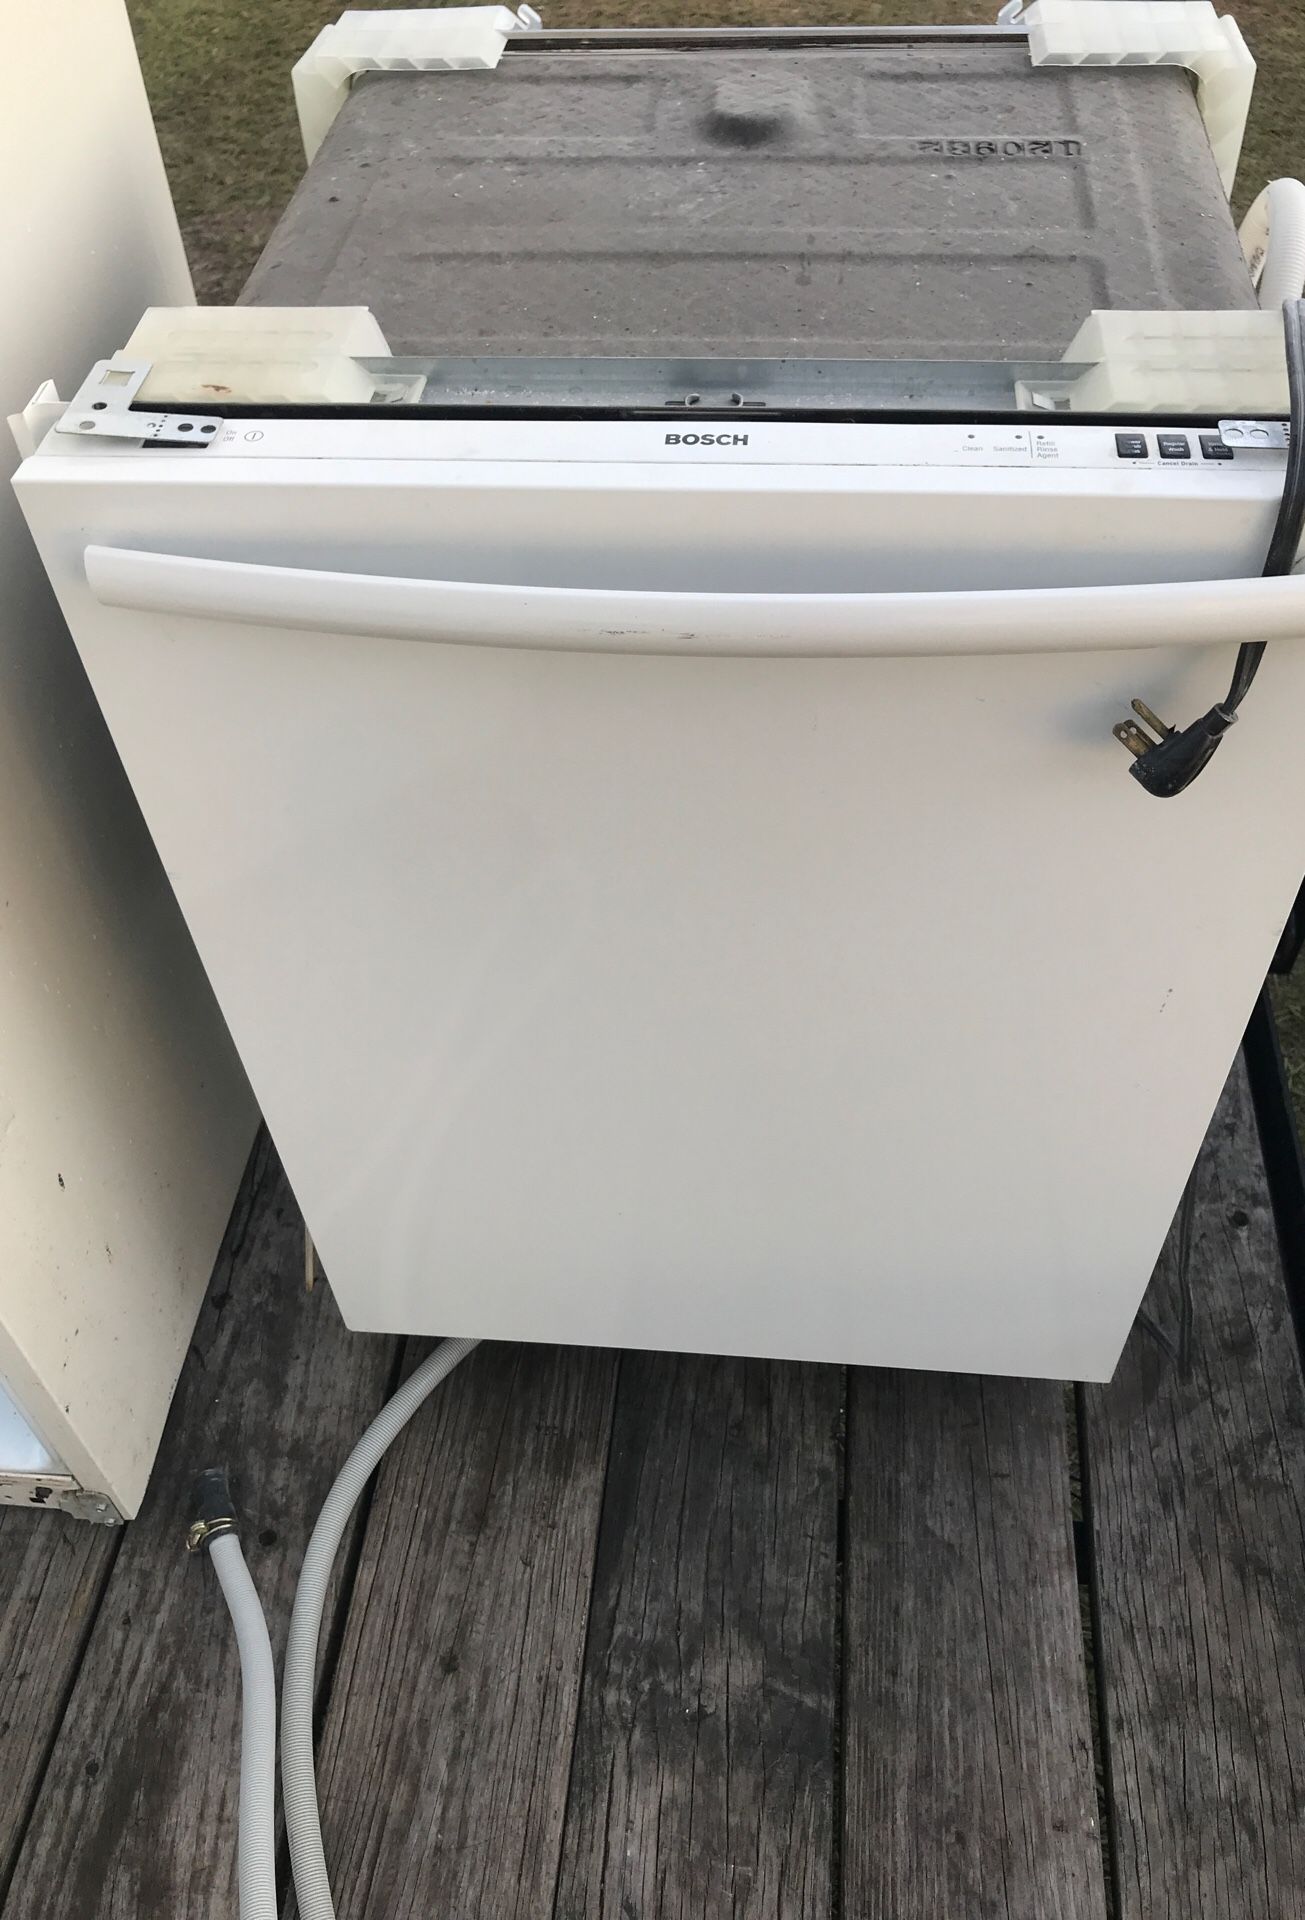 Bosch dish washer need gone ASAP and electric stove